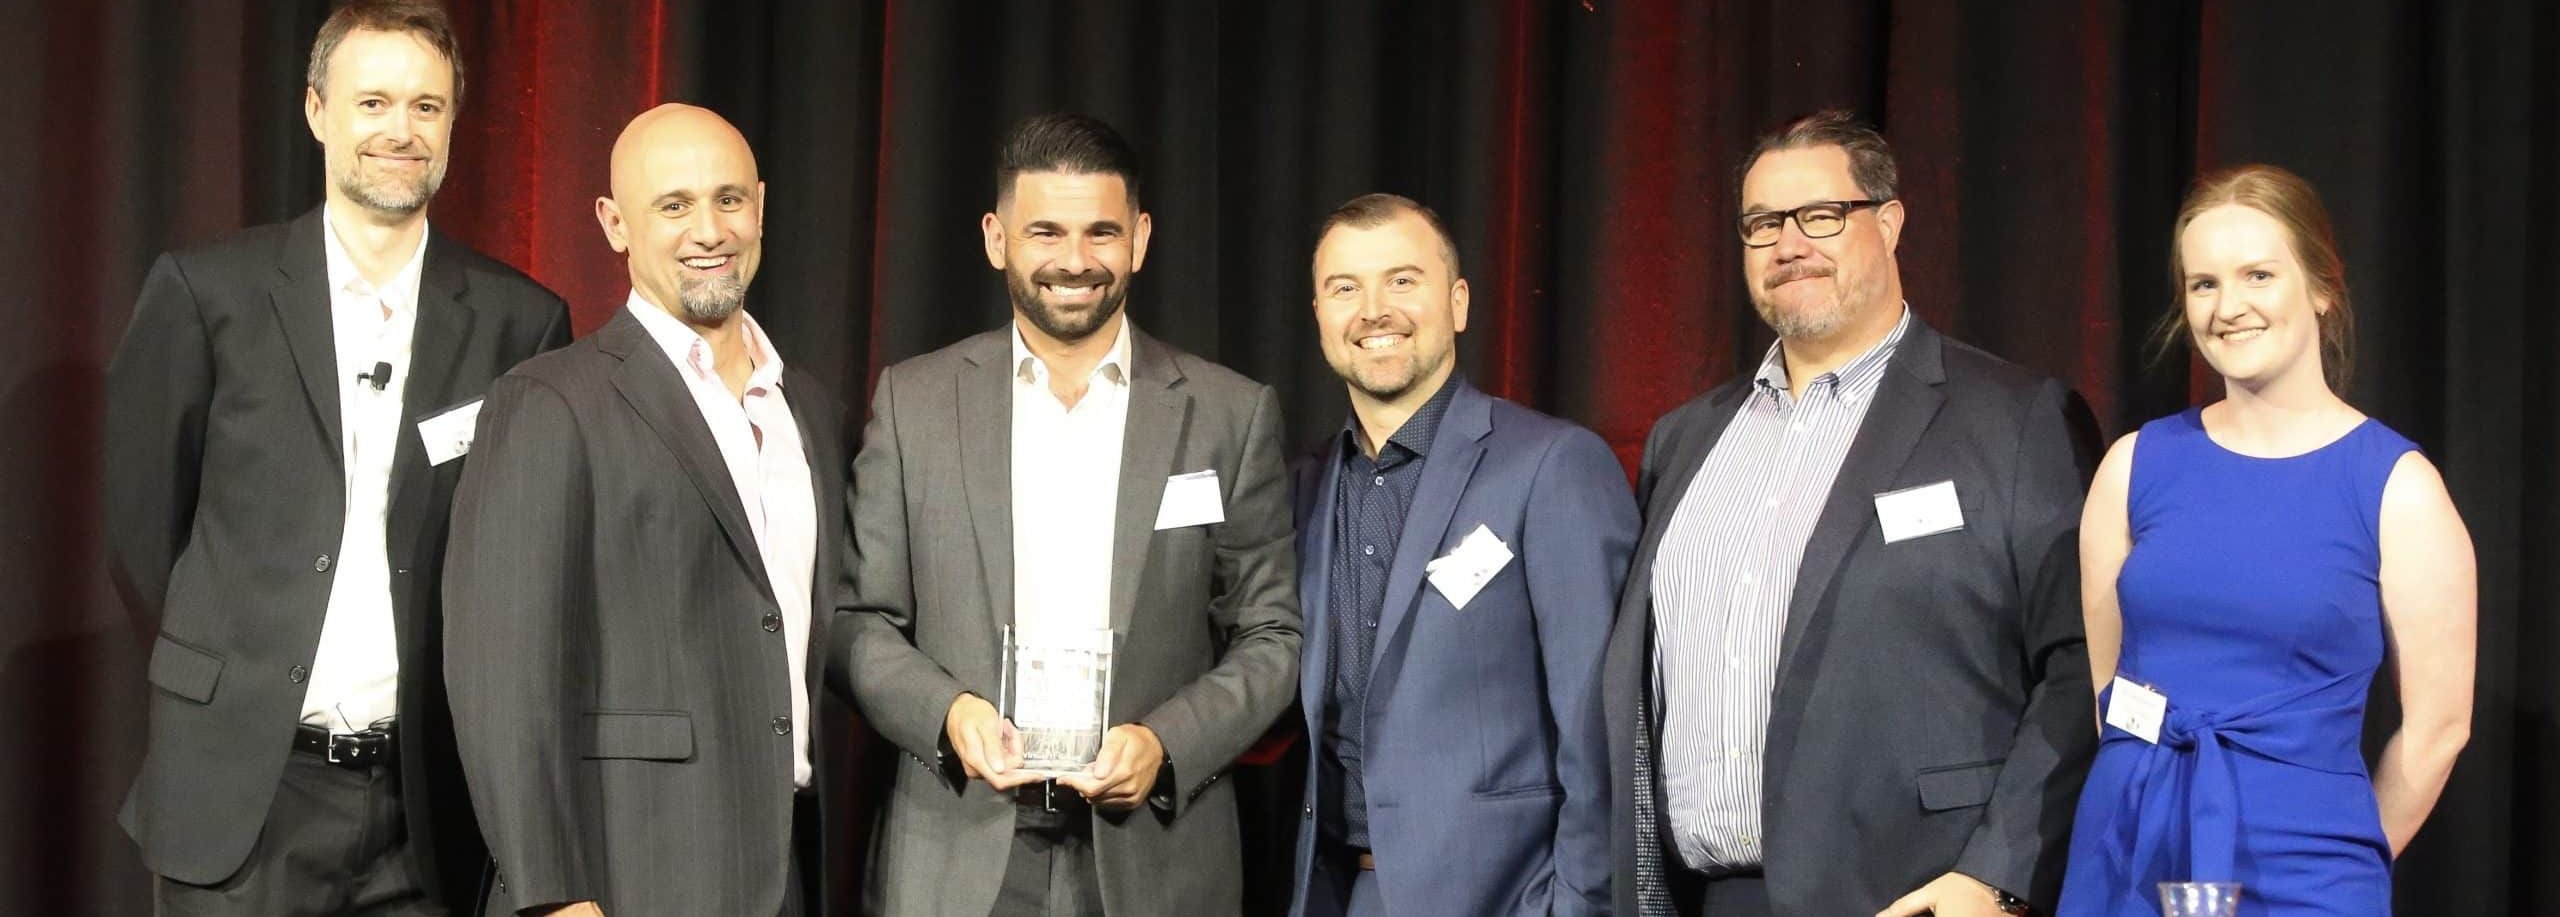 VITG - VITG ranked as the 8th fastest growing IT company in Australia